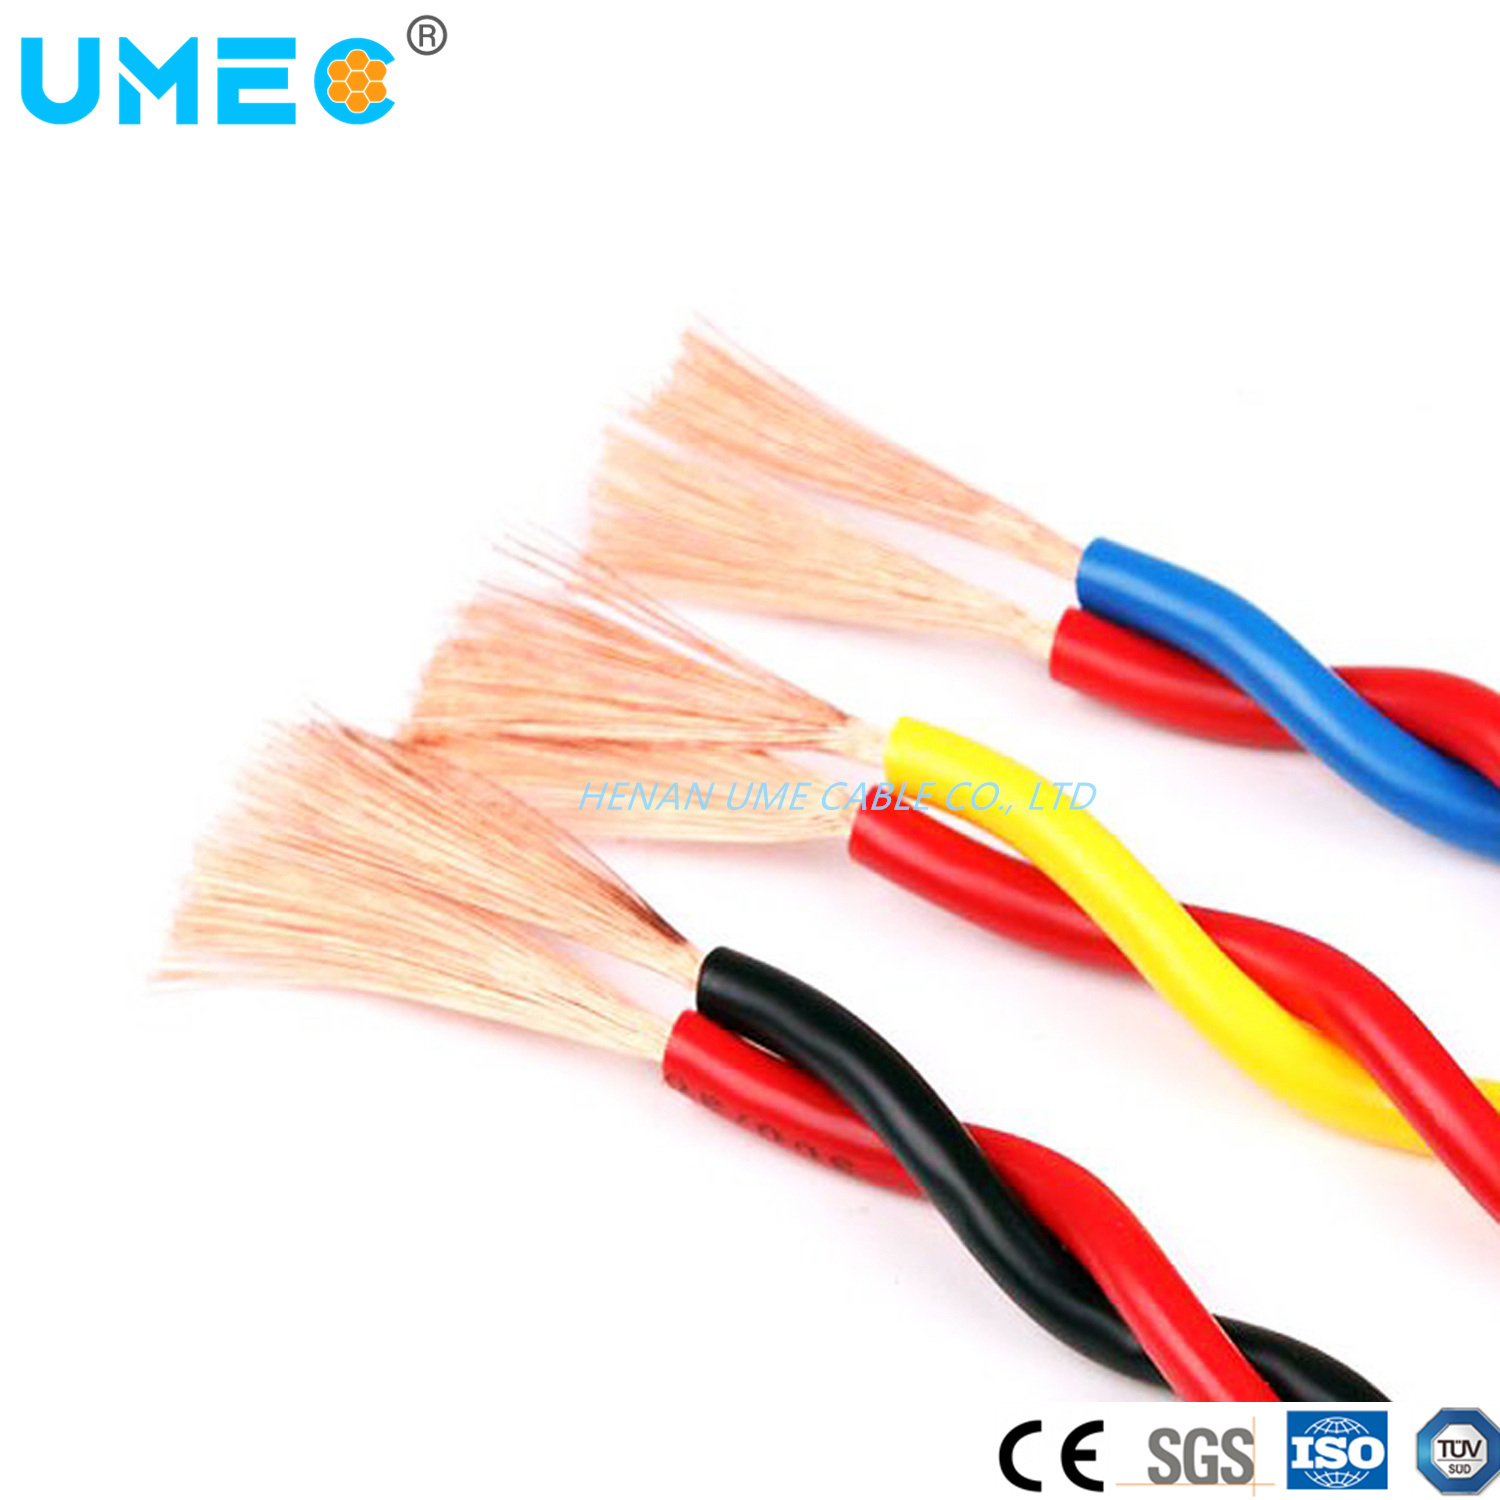 China Manufacture Alarm Cable 2cores*1.5mm Soft Fire PVC Insulated Flexible Twisted Electric Wire Rvs